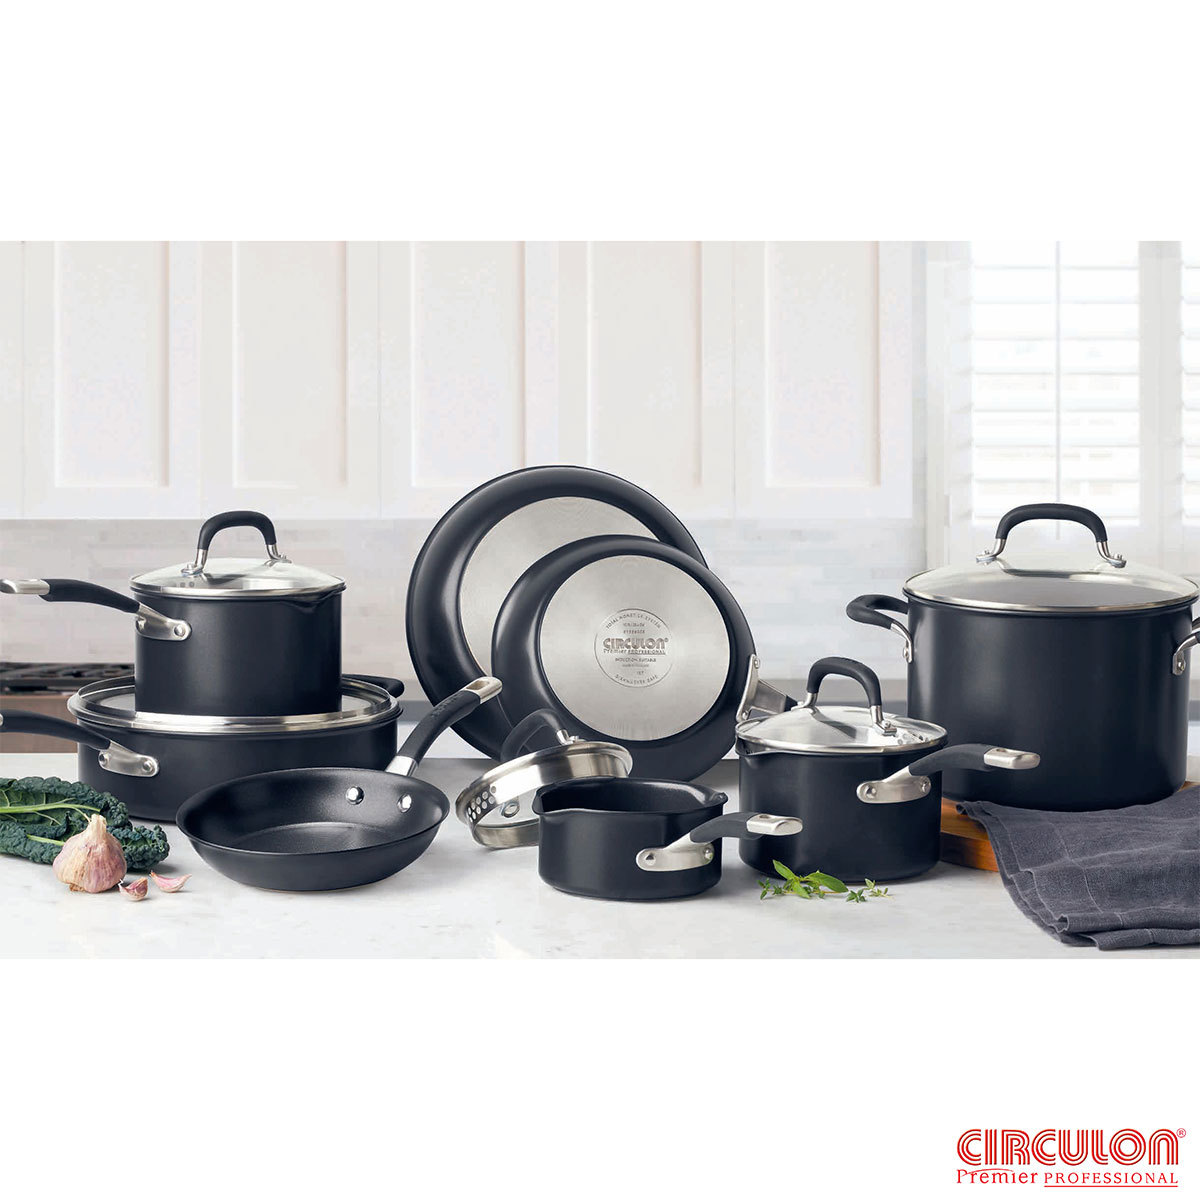 Circulon Premier Hard Anodised Induction 13 Piece Cookware Set in Black or  Bronz